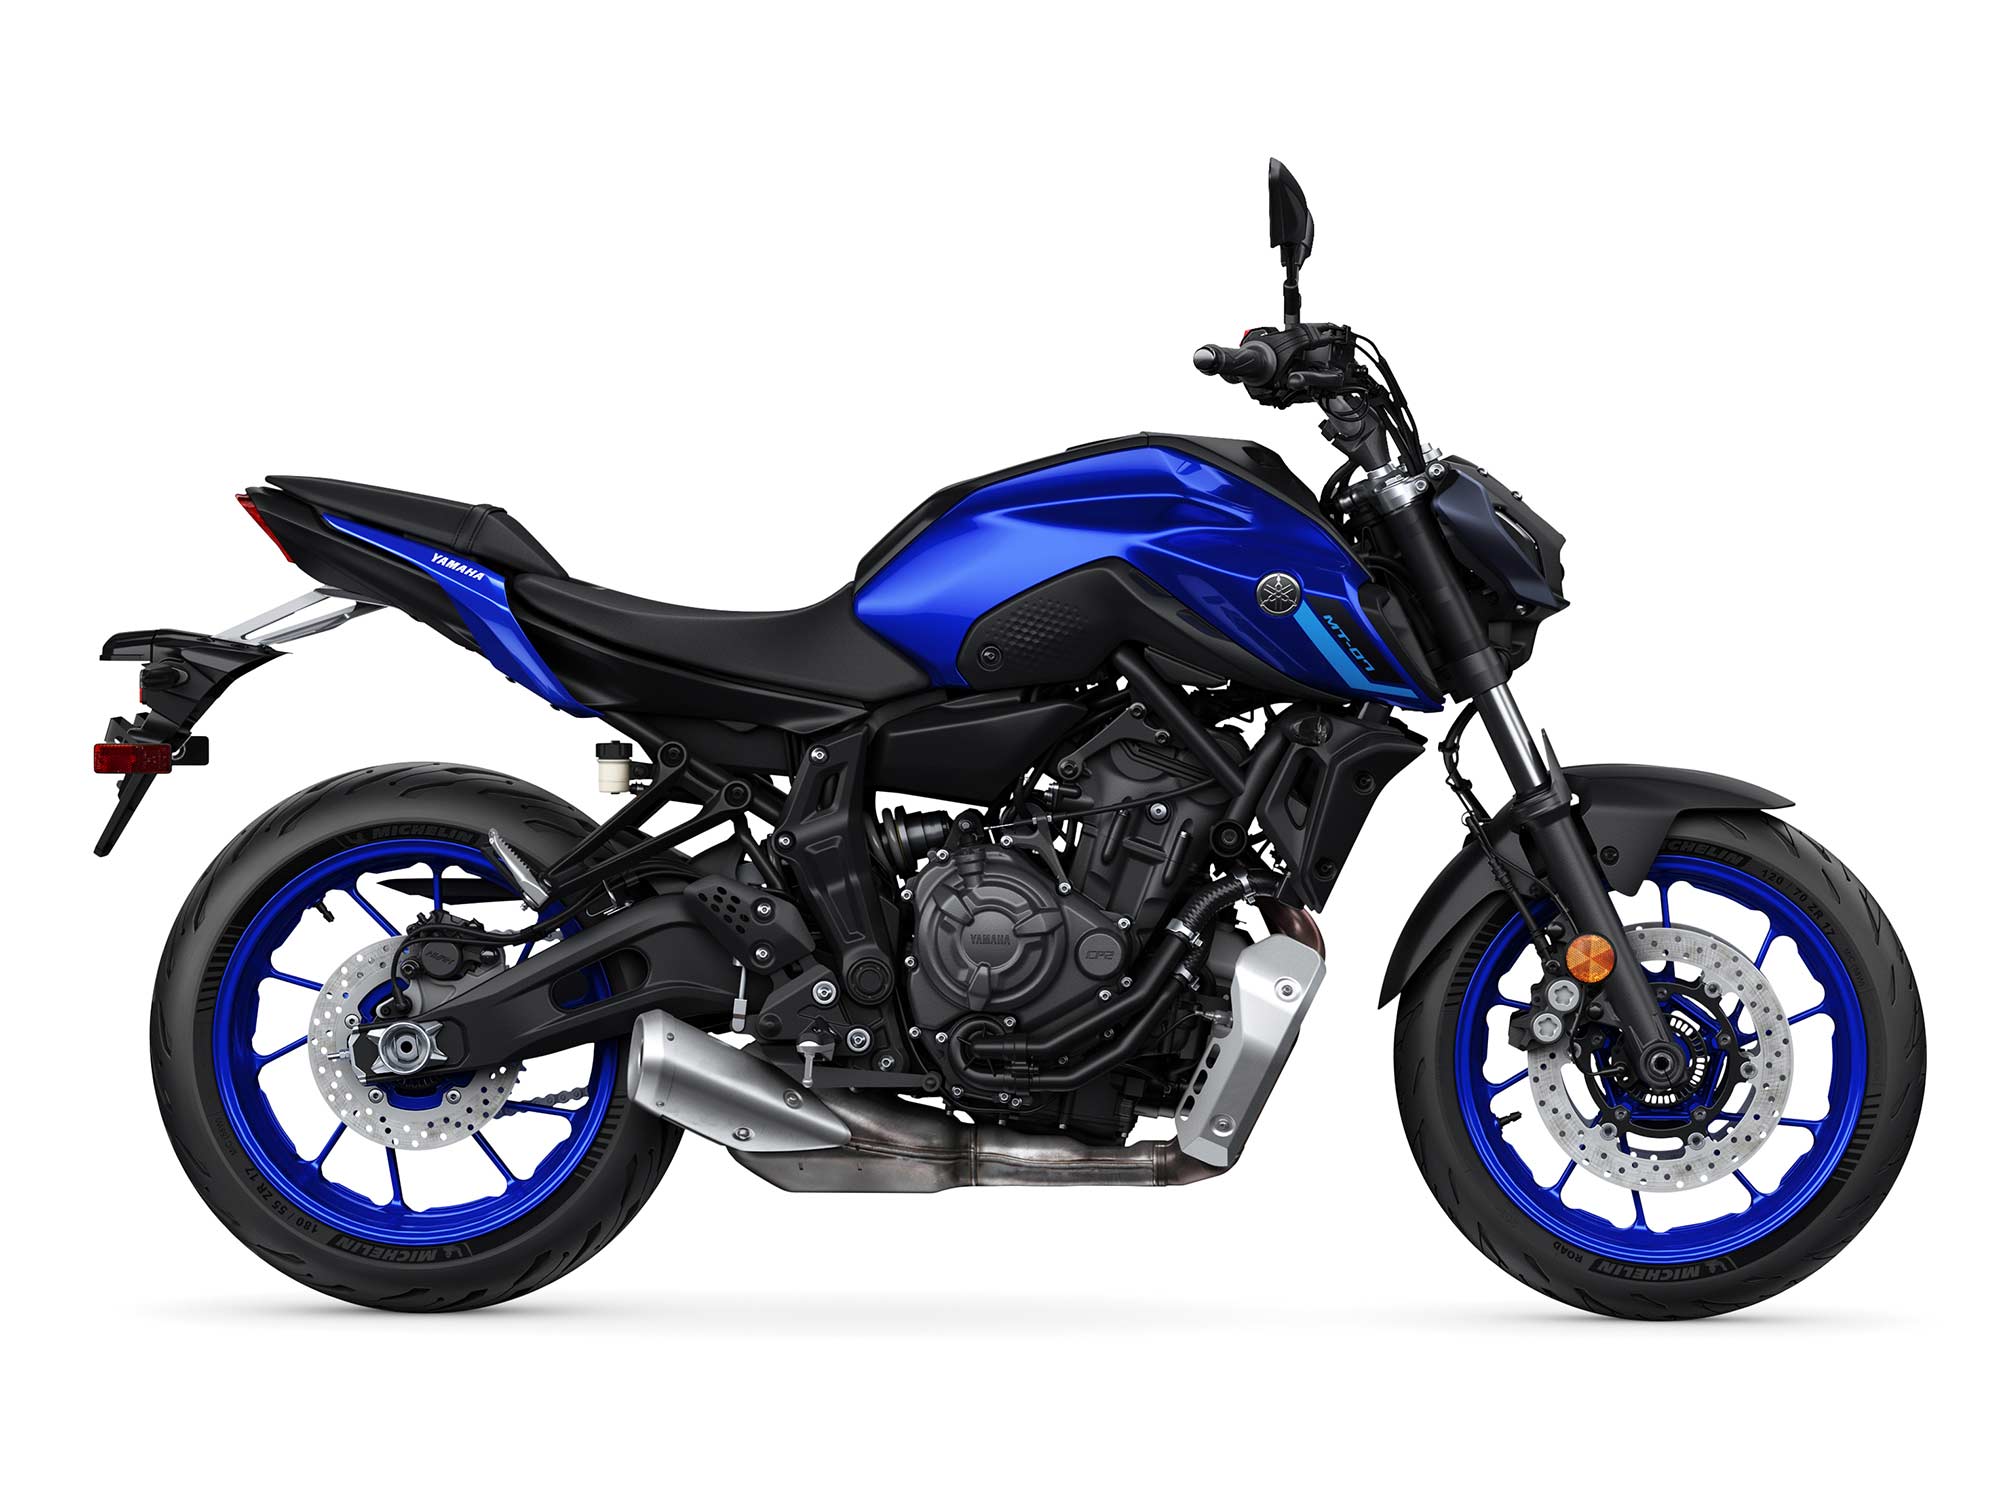 2023 Yamaha MT-07 Buyer's Guide: Specs, Photos, Price | Cycle World